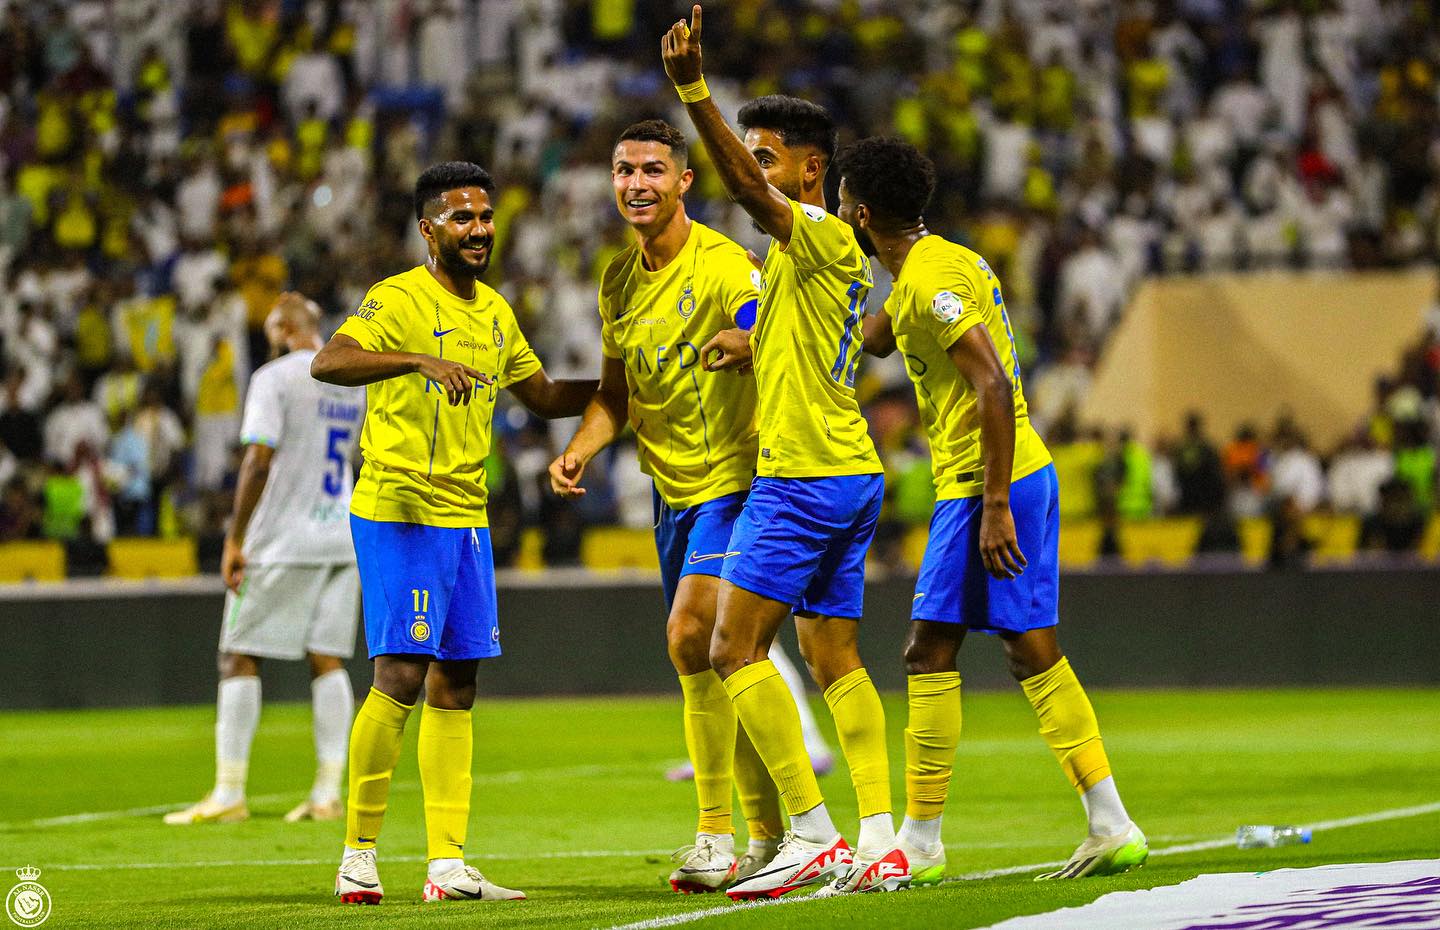 Ronaldo scored the 63rd hat-trick of his career to help Al-Nassr win the start of the season - Photo 4.